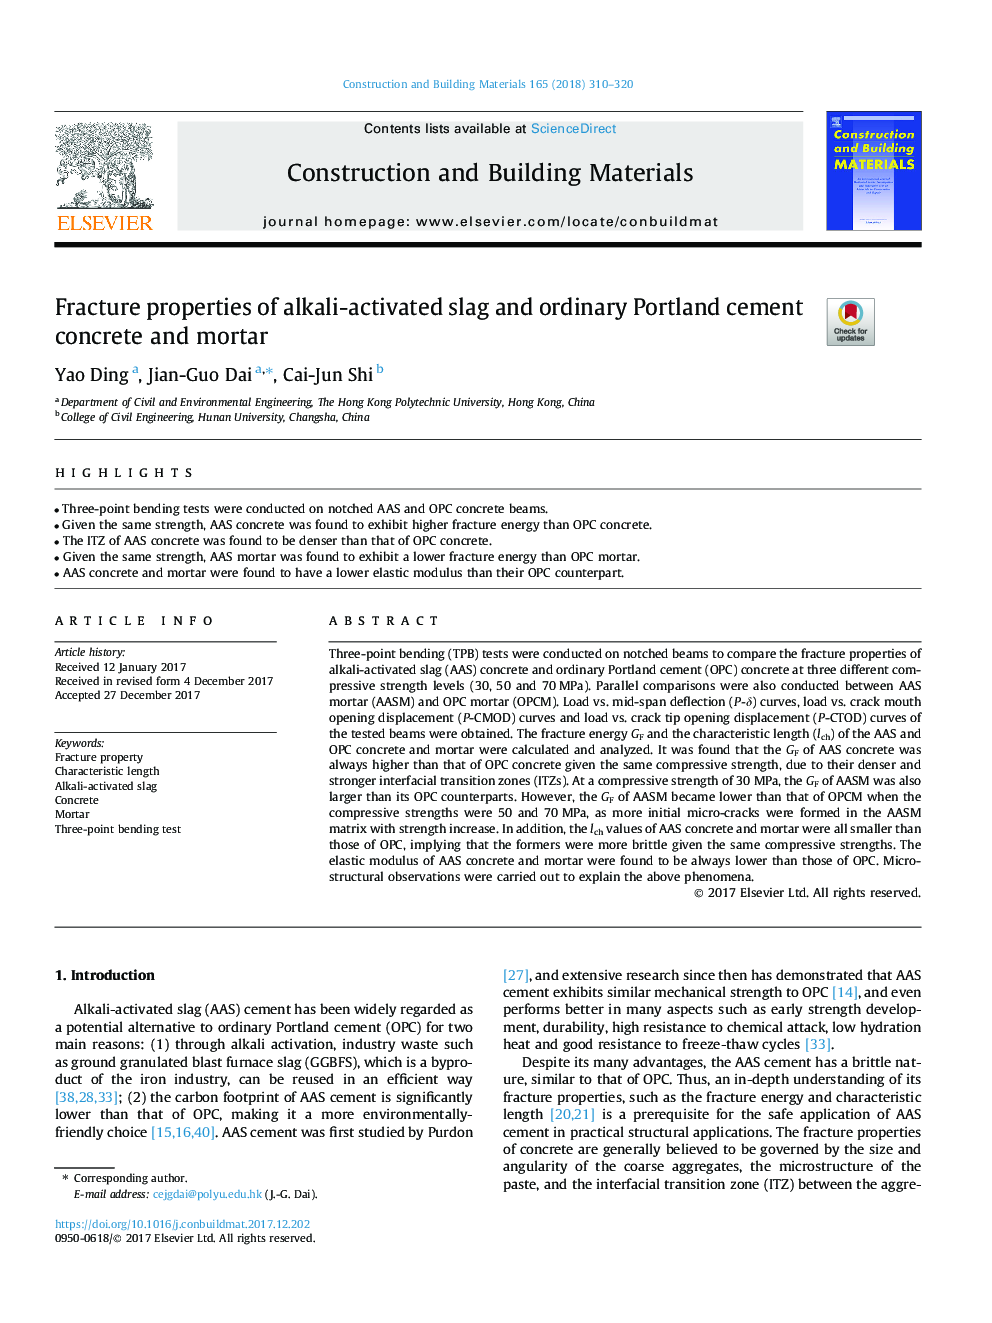 Fracture properties of alkali-activated slag and ordinary Portland cement concrete and mortar